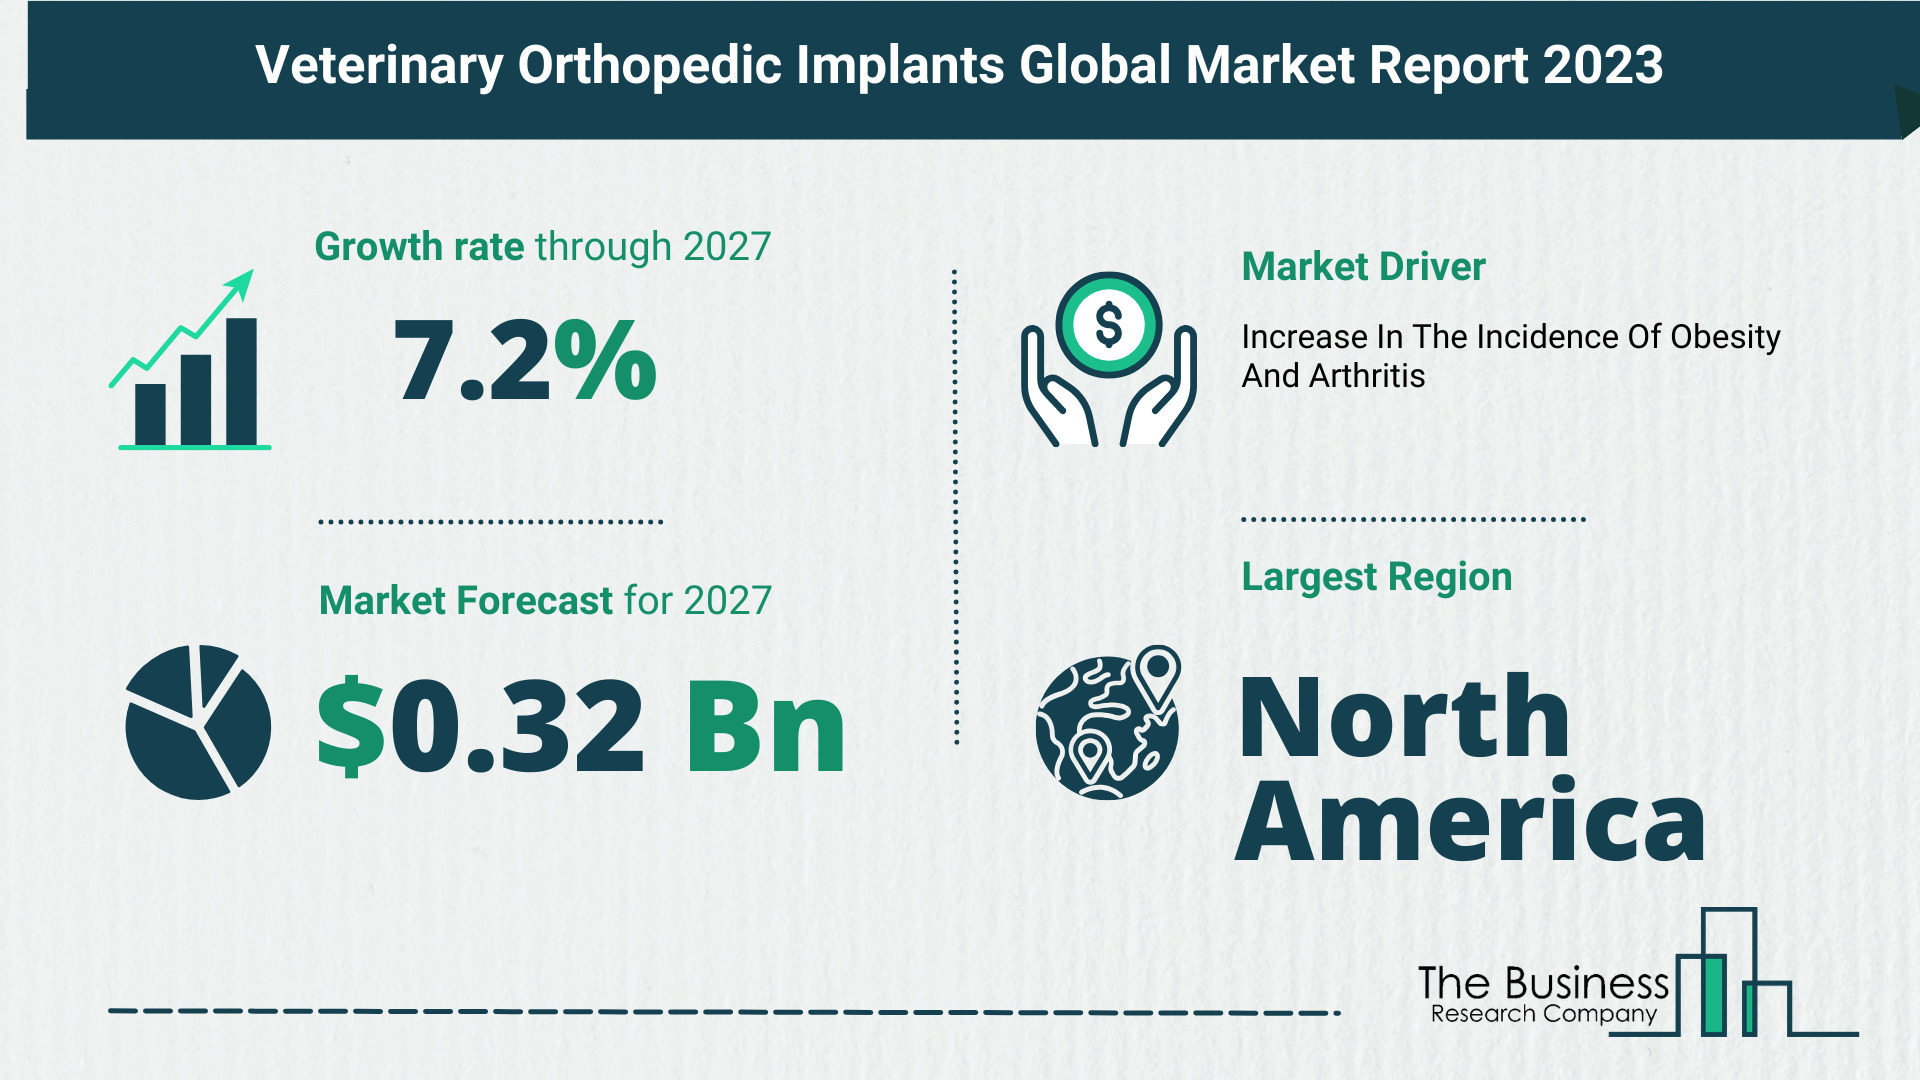 Overview Of The Veterinary Orthopedic Implants Market 2023: Size, Drivers, And Trends